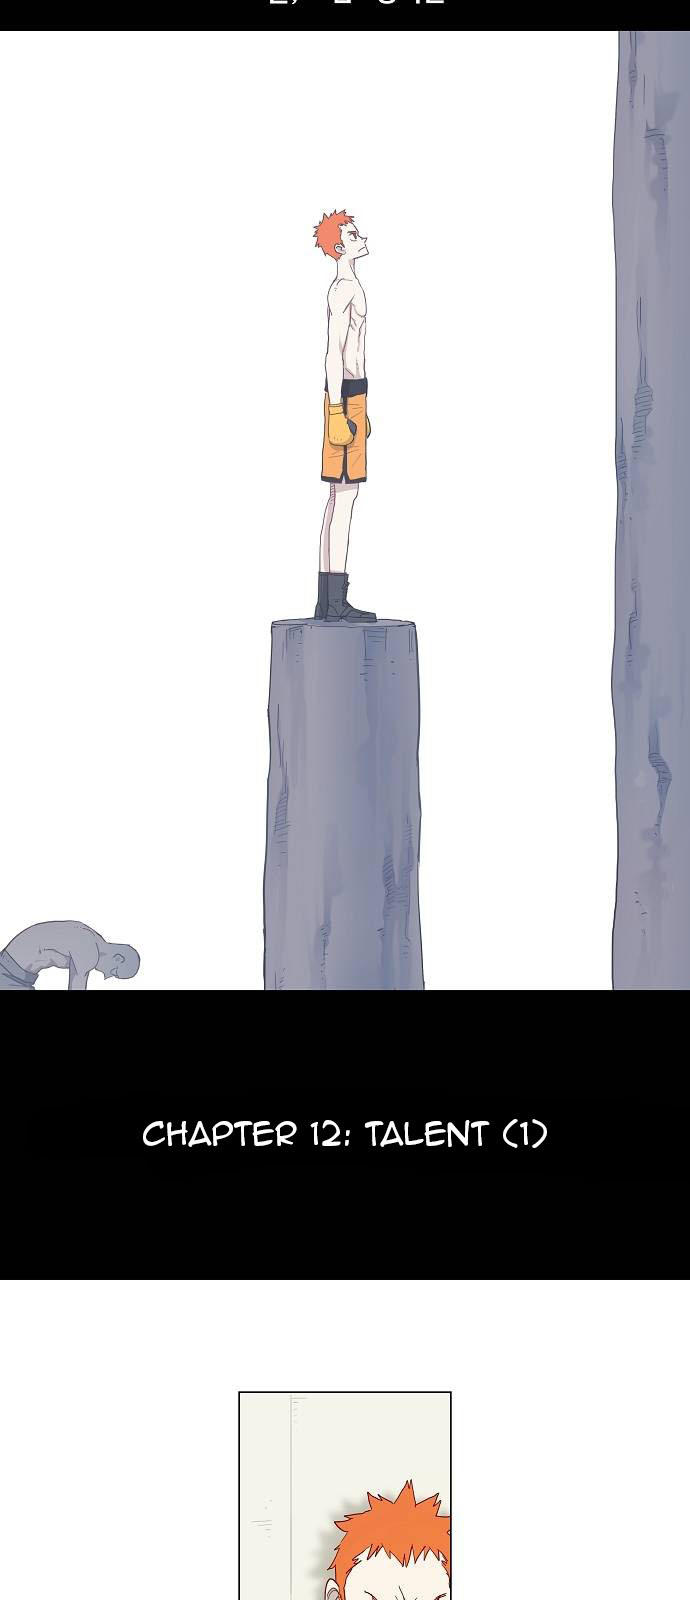 The Boxer Chapter 12: Talent (1) page 8 - 